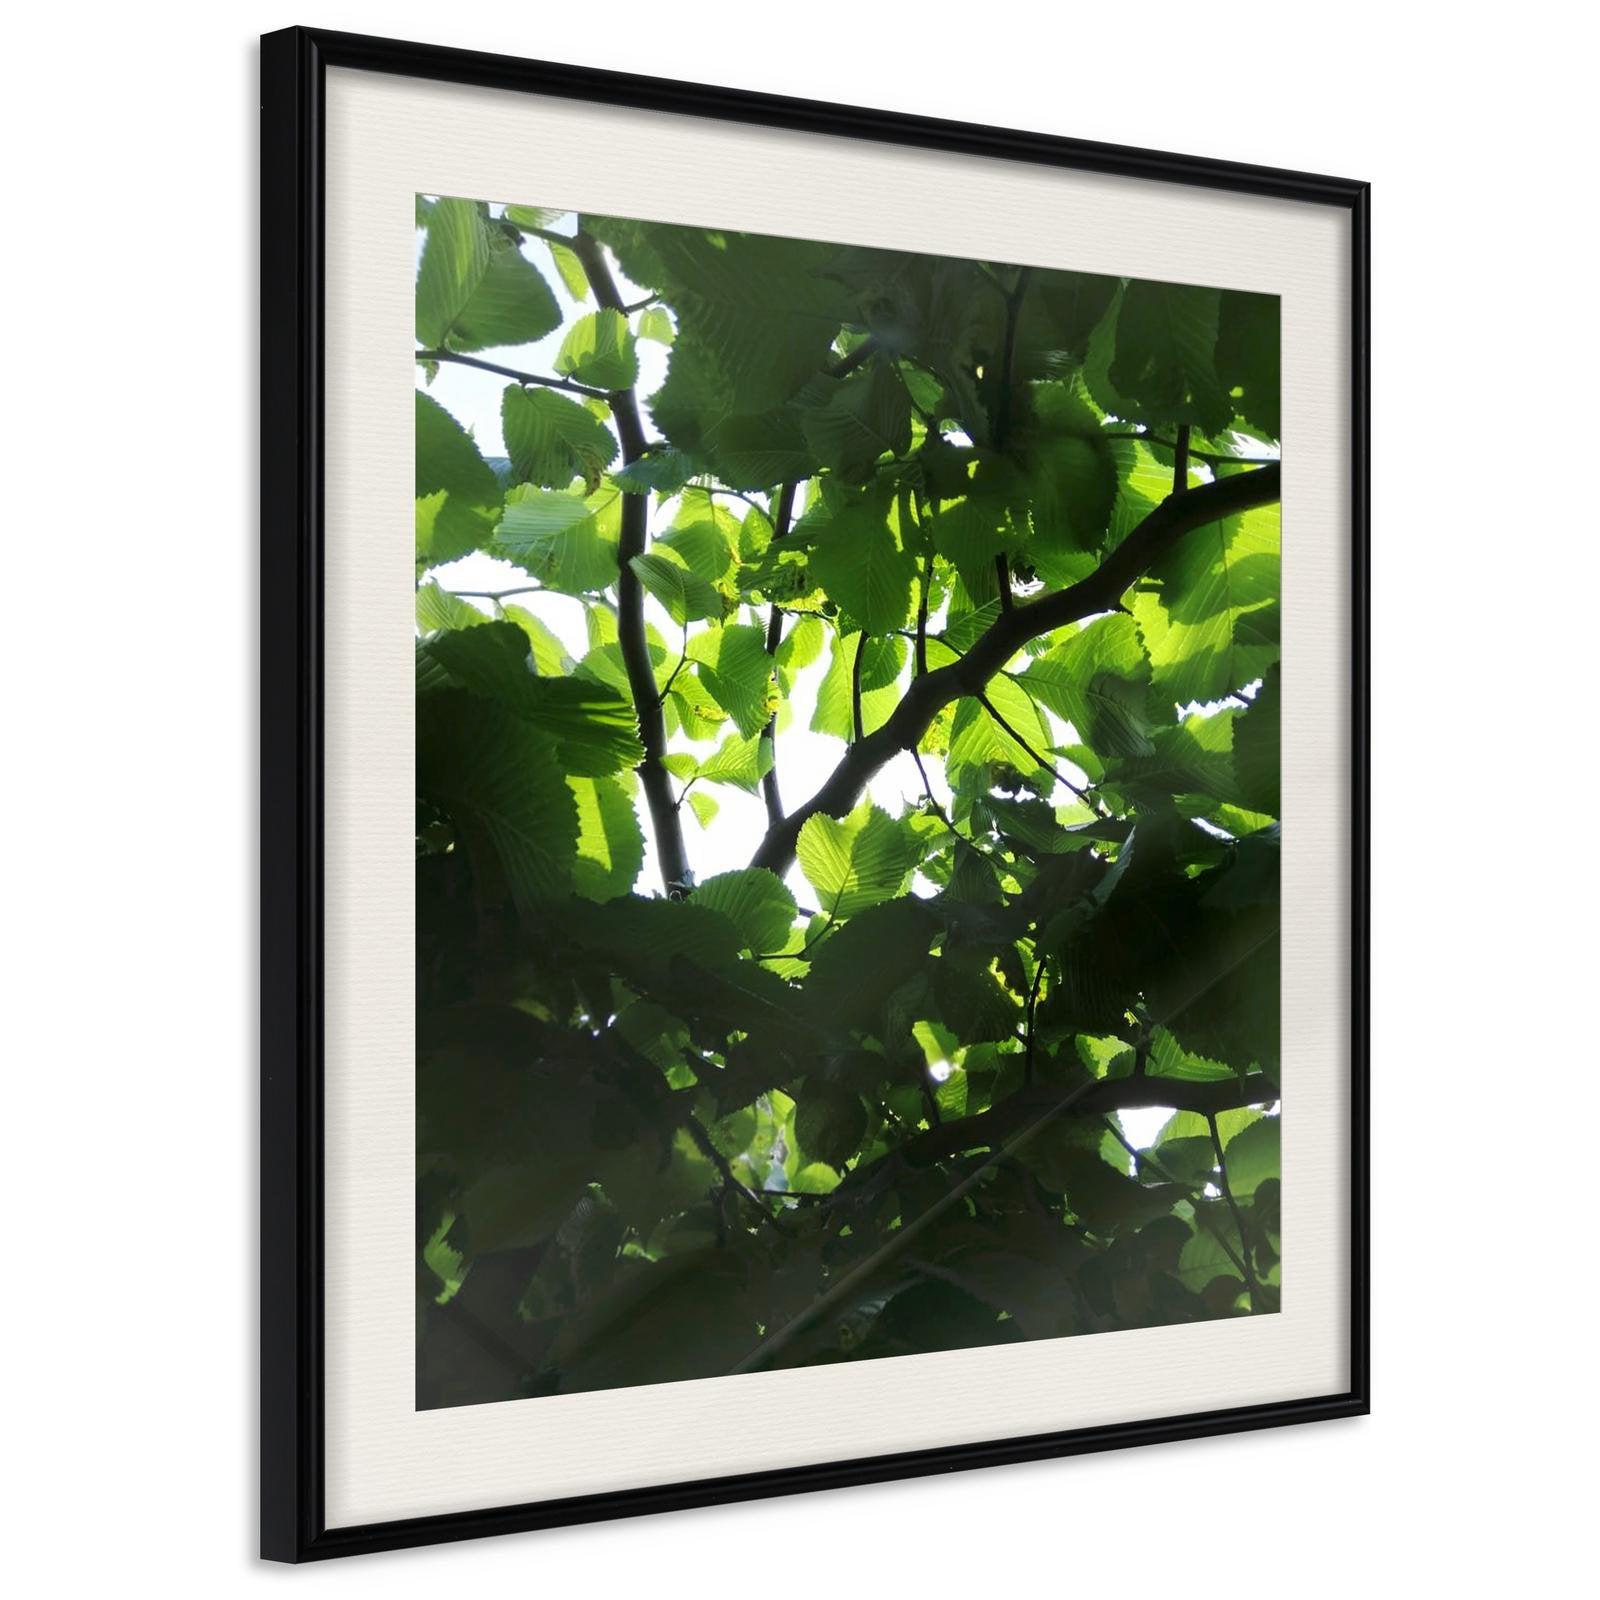 Inramad Poster / Tavla - Under Cover of Leaves-Poster Inramad-Artgeist-20x20-Svart ram med passepartout-peaceofhome.se